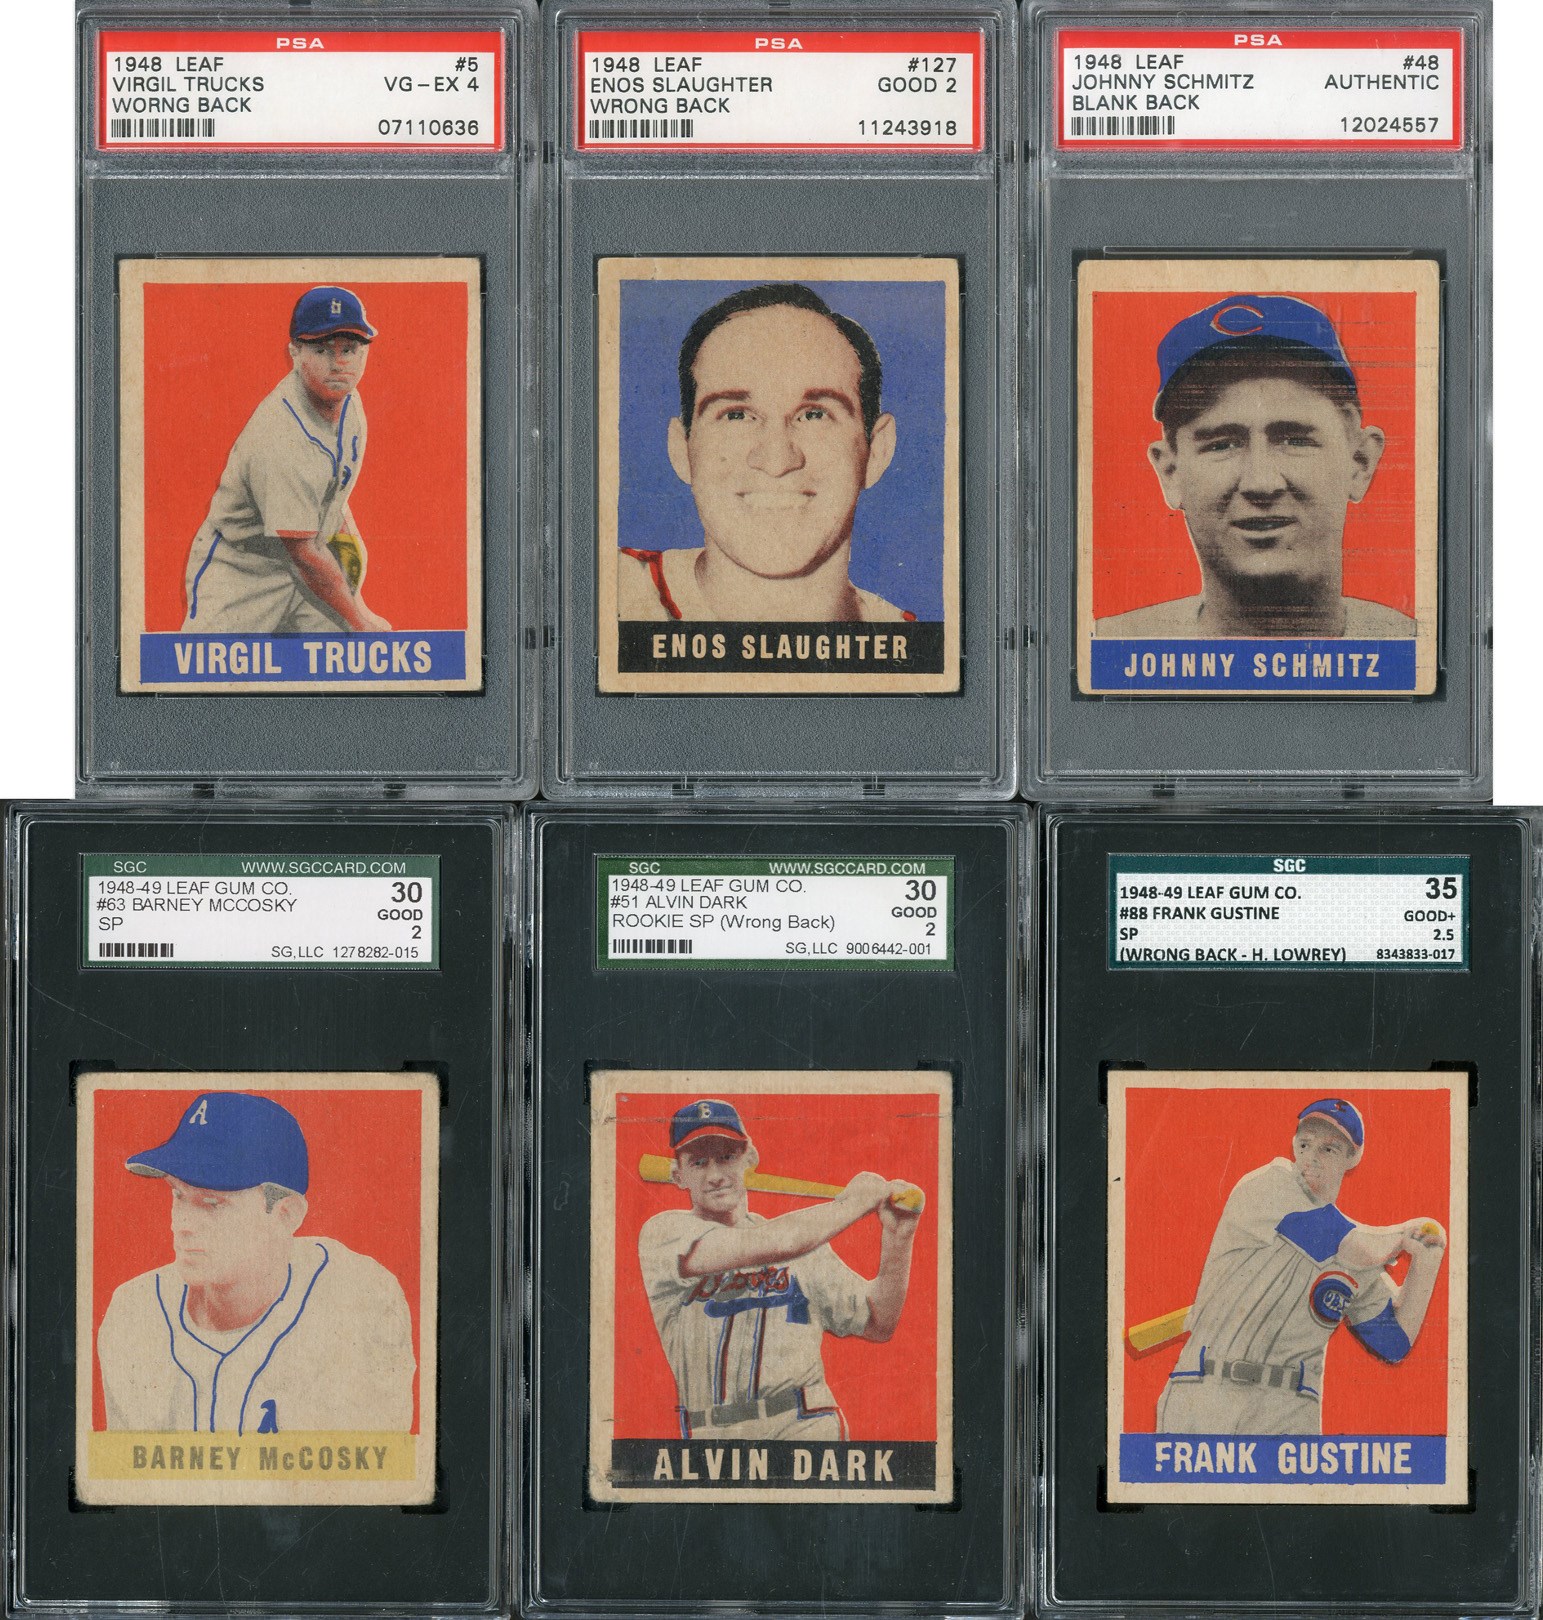 - 1948 Leaf PSA and SGC Graded SP Collection of Wrong Backs and Blank Backs